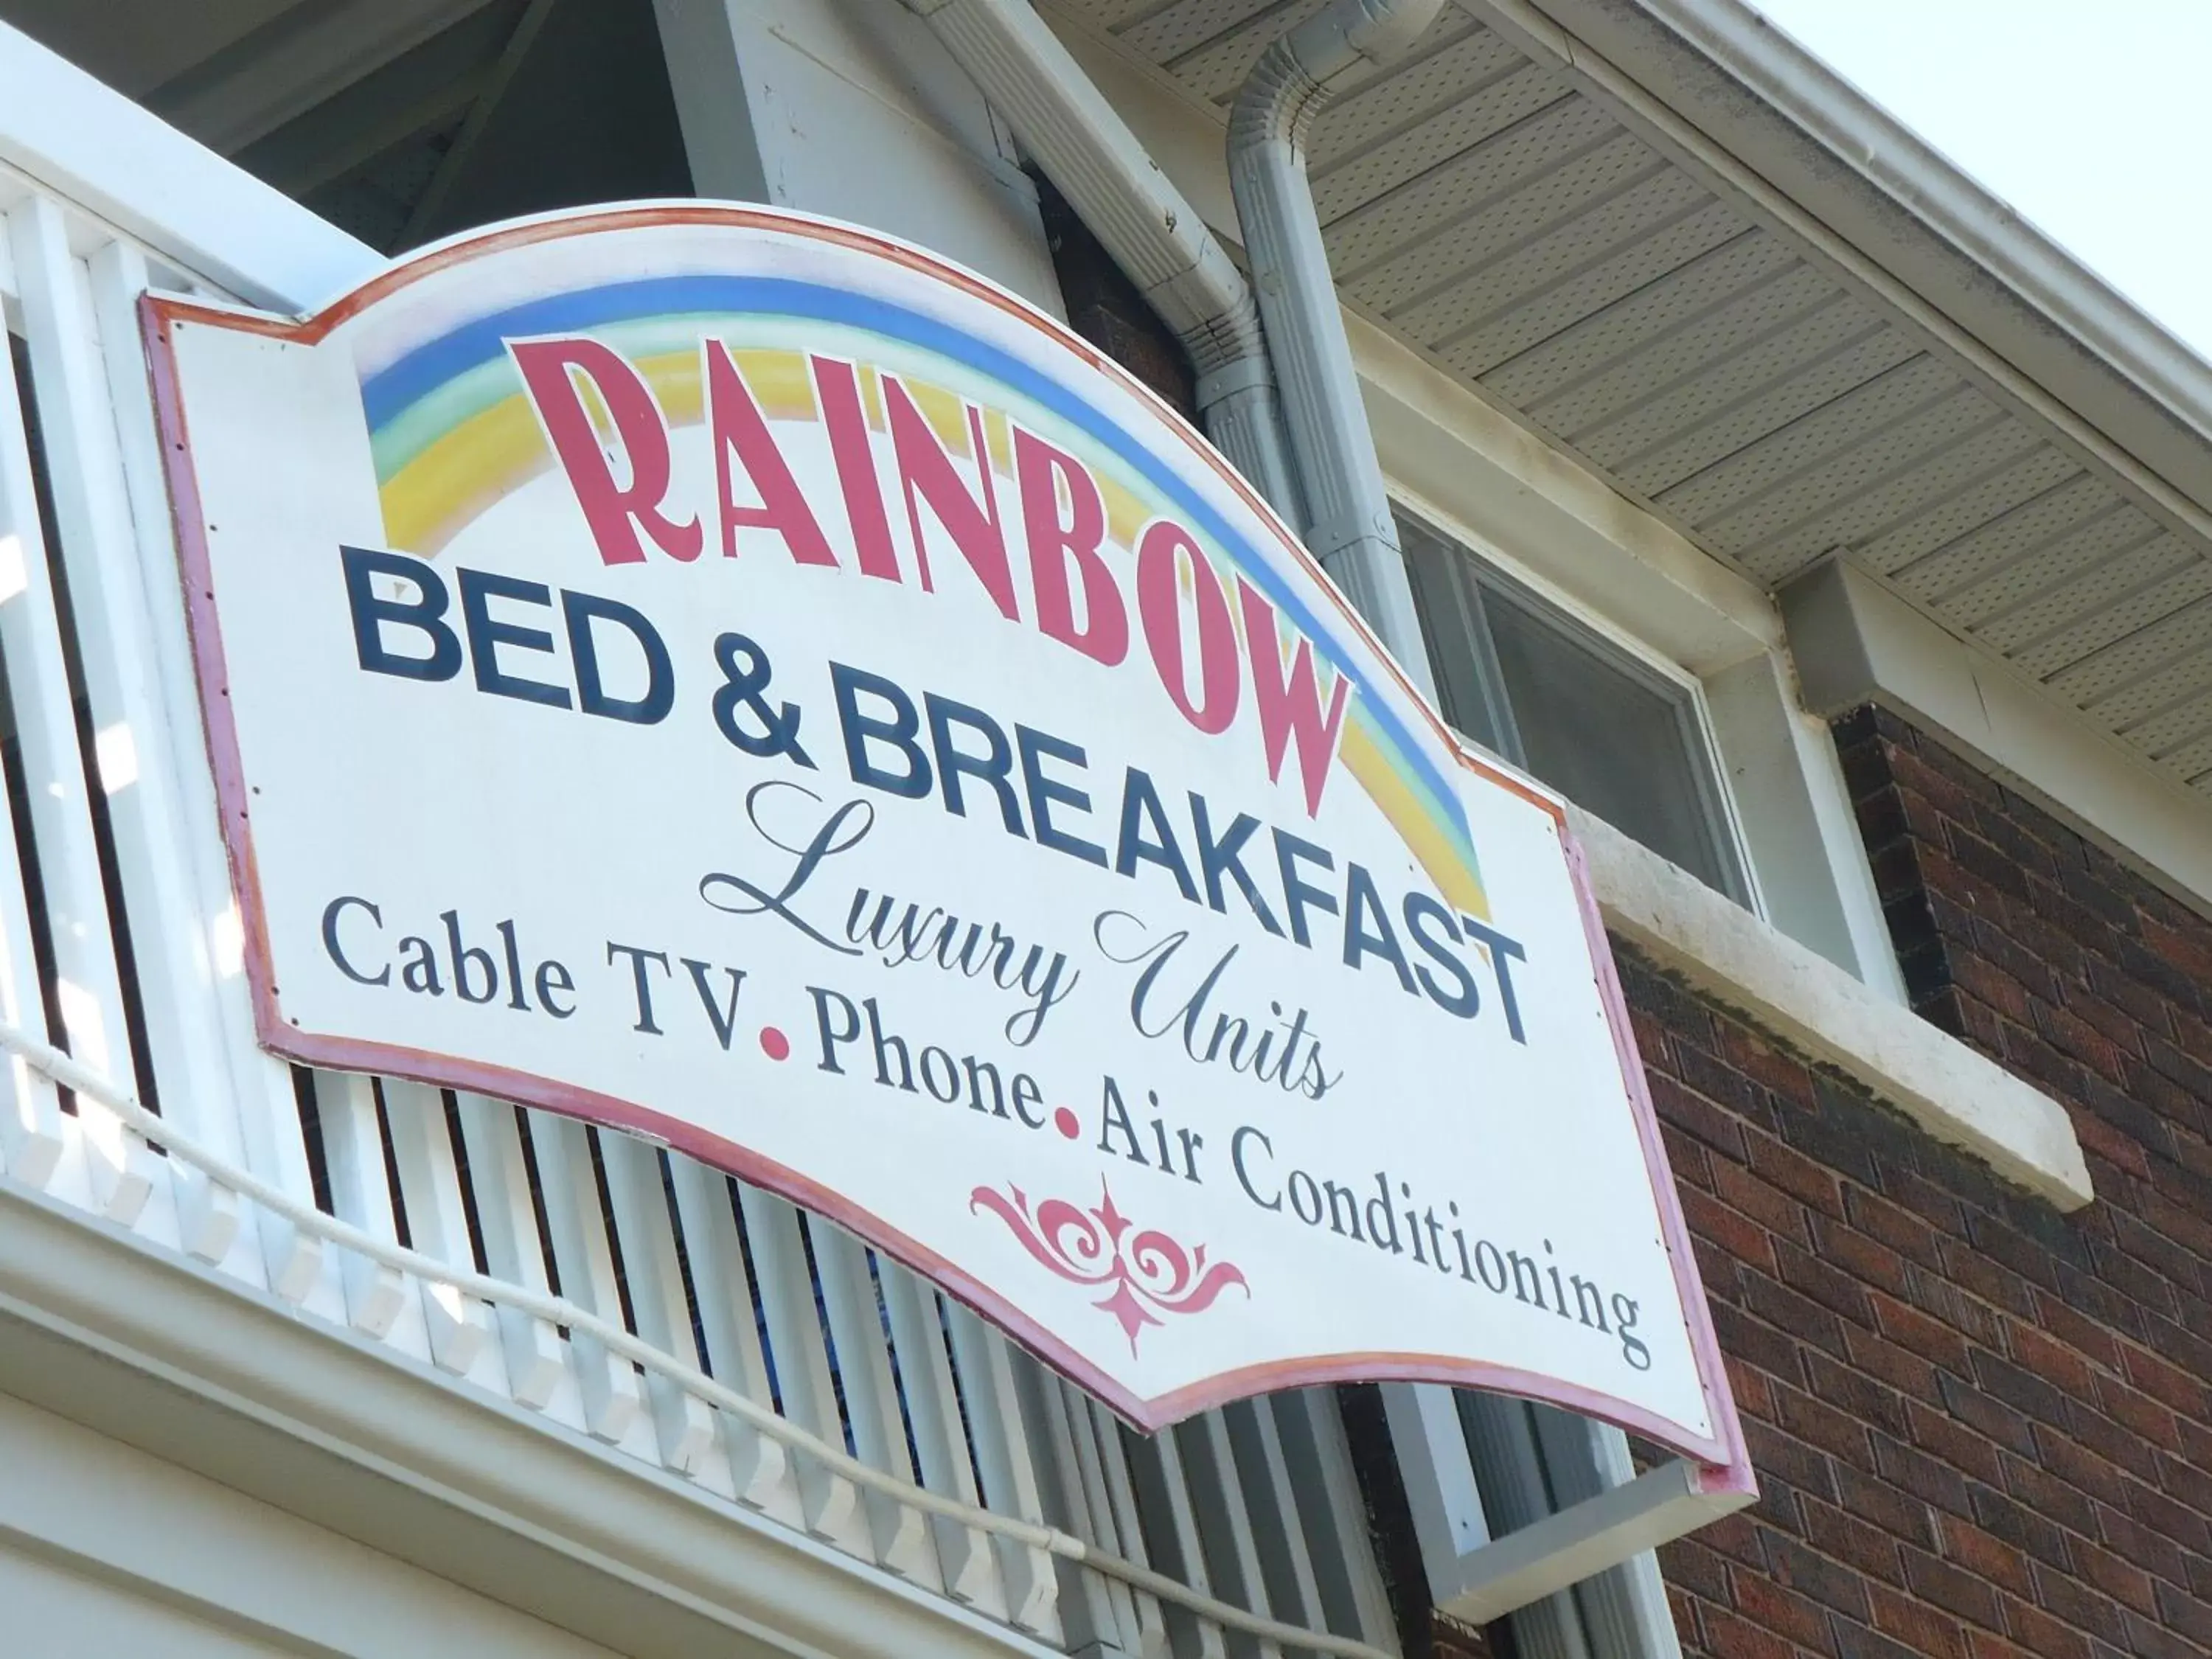 Property logo or sign in Rainbow Bed & Breakfast